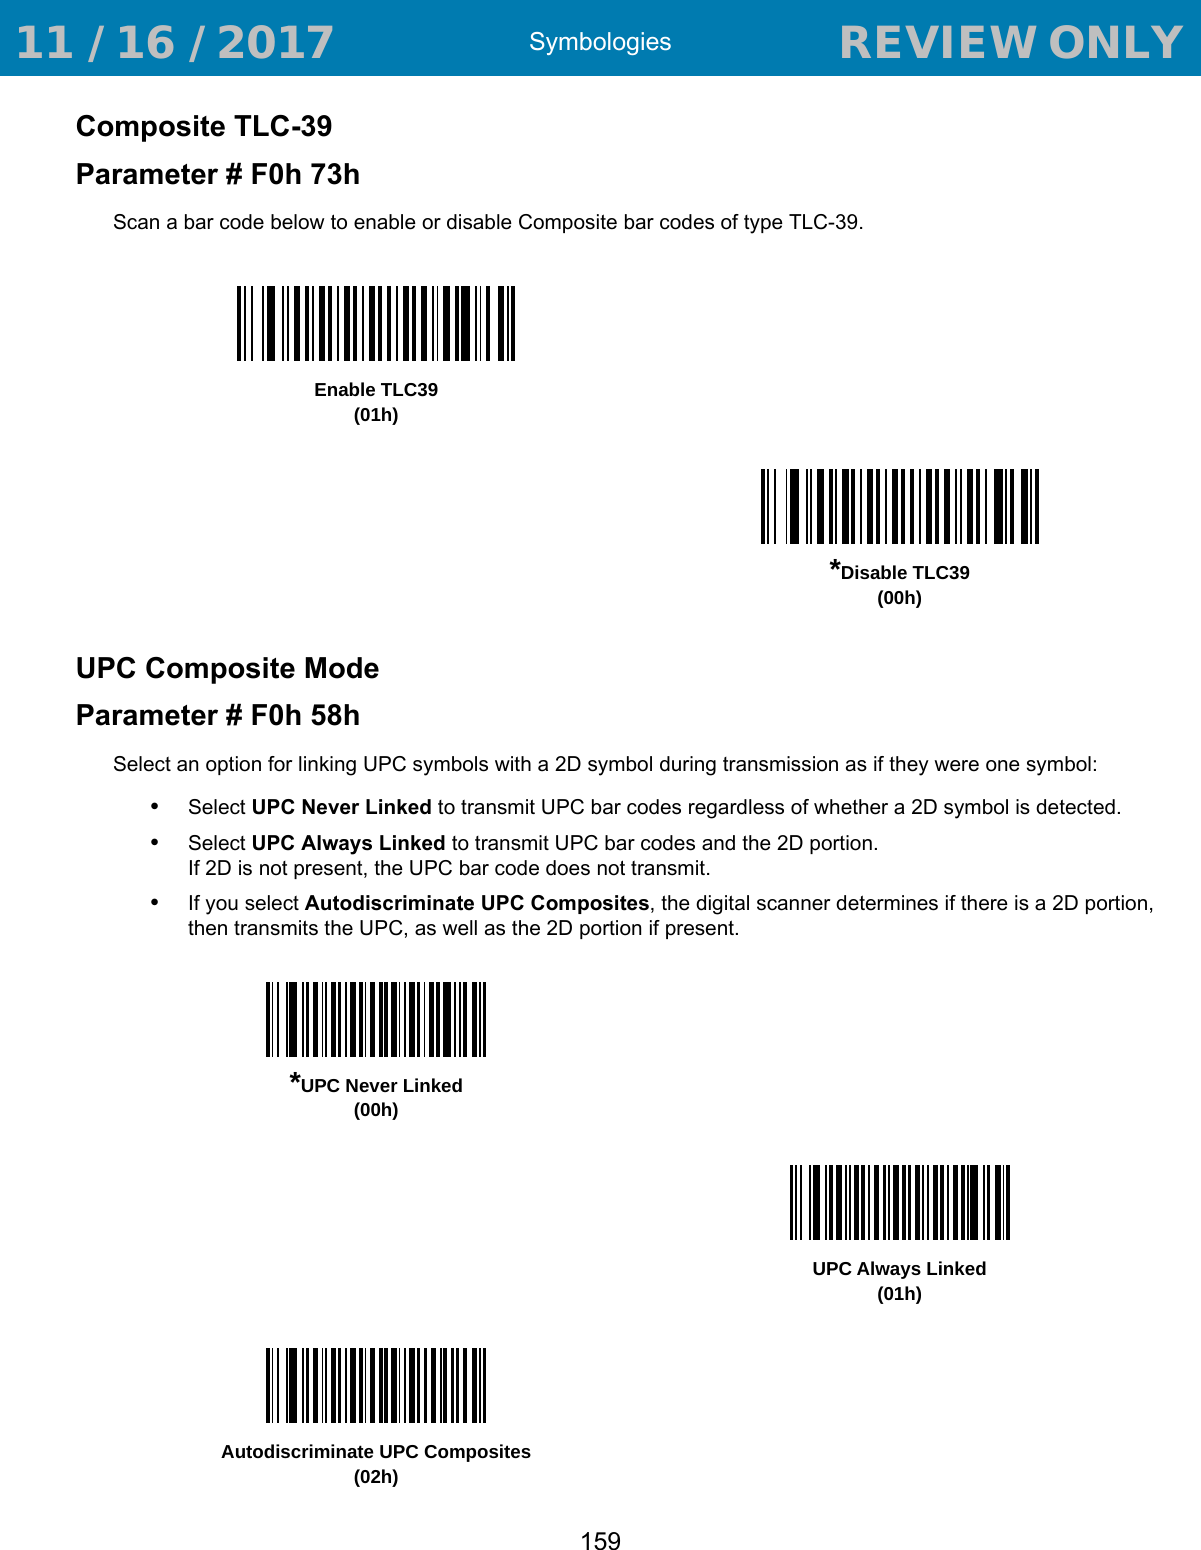 Symbologies159Composite TLC-39Parameter # F0h 73hScan a bar code below to enable or disable Composite bar codes of type TLC-39. UPC Composite ModeParameter # F0h 58hSelect an option for linking UPC symbols with a 2D symbol during transmission as if they were one symbol:•Select UPC Never Linked to transmit UPC bar codes regardless of whether a 2D symbol is detected.•Select UPC Always Linked to transmit UPC bar codes and the 2D portion. If 2D is not present, the UPC bar code does not transmit.•If you select Autodiscriminate UPC Composites, the digital scanner determines if there is a 2D portion, then transmits the UPC, as well as the 2D portion if present.Enable TLC39(01h)*Disable TLC39(00h)*UPC Never Linked(00h)UPC Always Linked(01h)Autodiscriminate UPC Composites(02h) 11 / 16 / 2017                                  REVIEW ONLY                             REVIEW ONLY - REVIEW ONLY - REVIEW ONLY